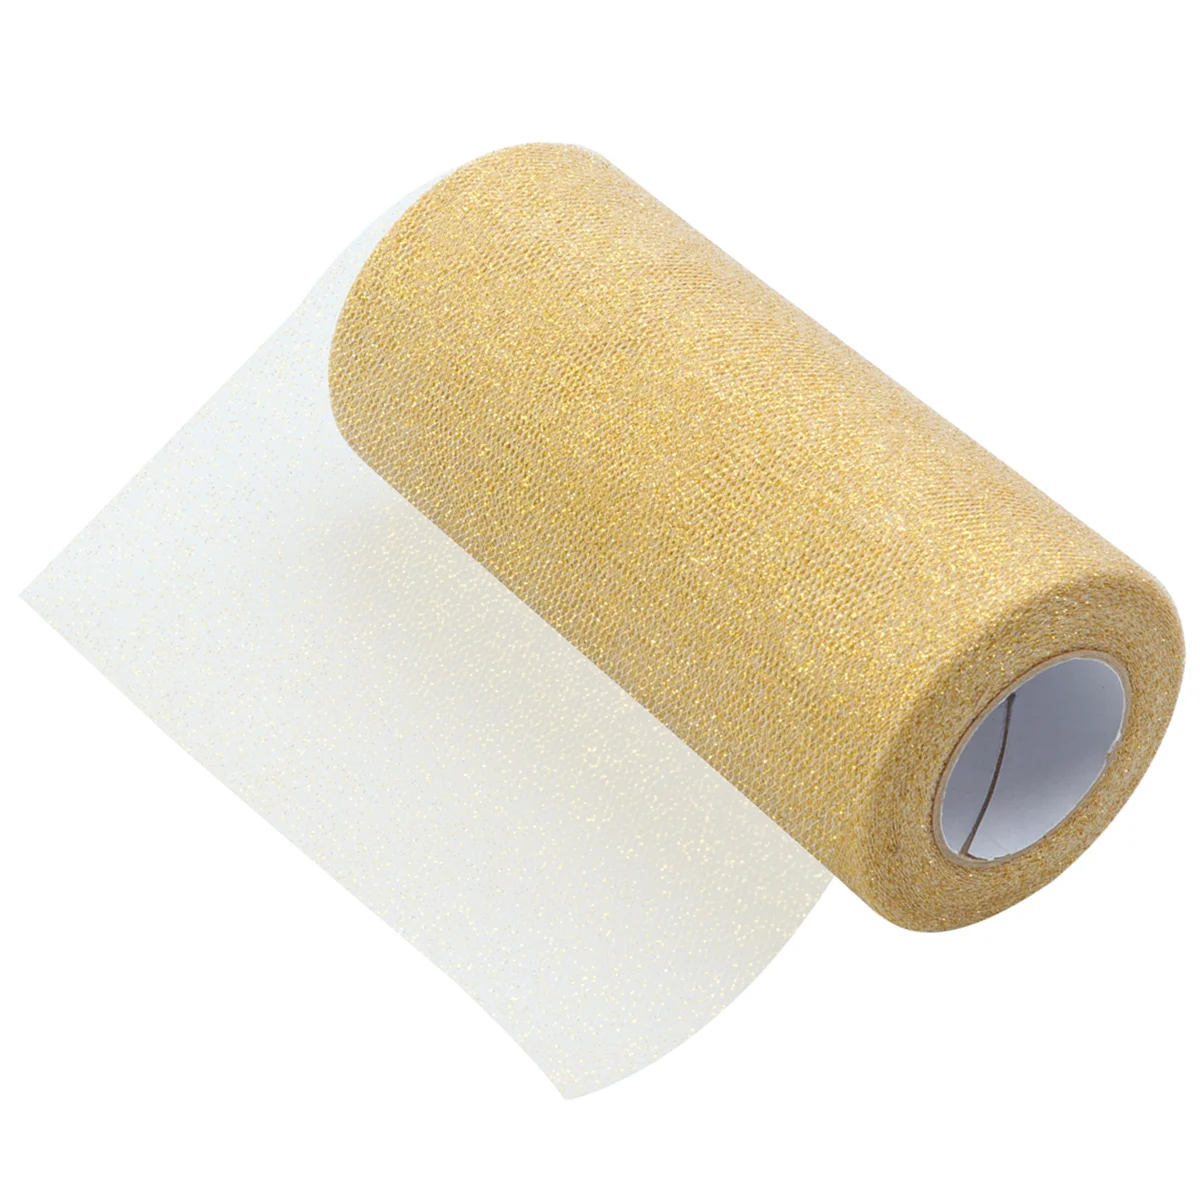 

6 Inch Sparkling Tulle Ribbon Roll Glitter Tulle Rolls 25 Yards Tulle Spool (Gold)